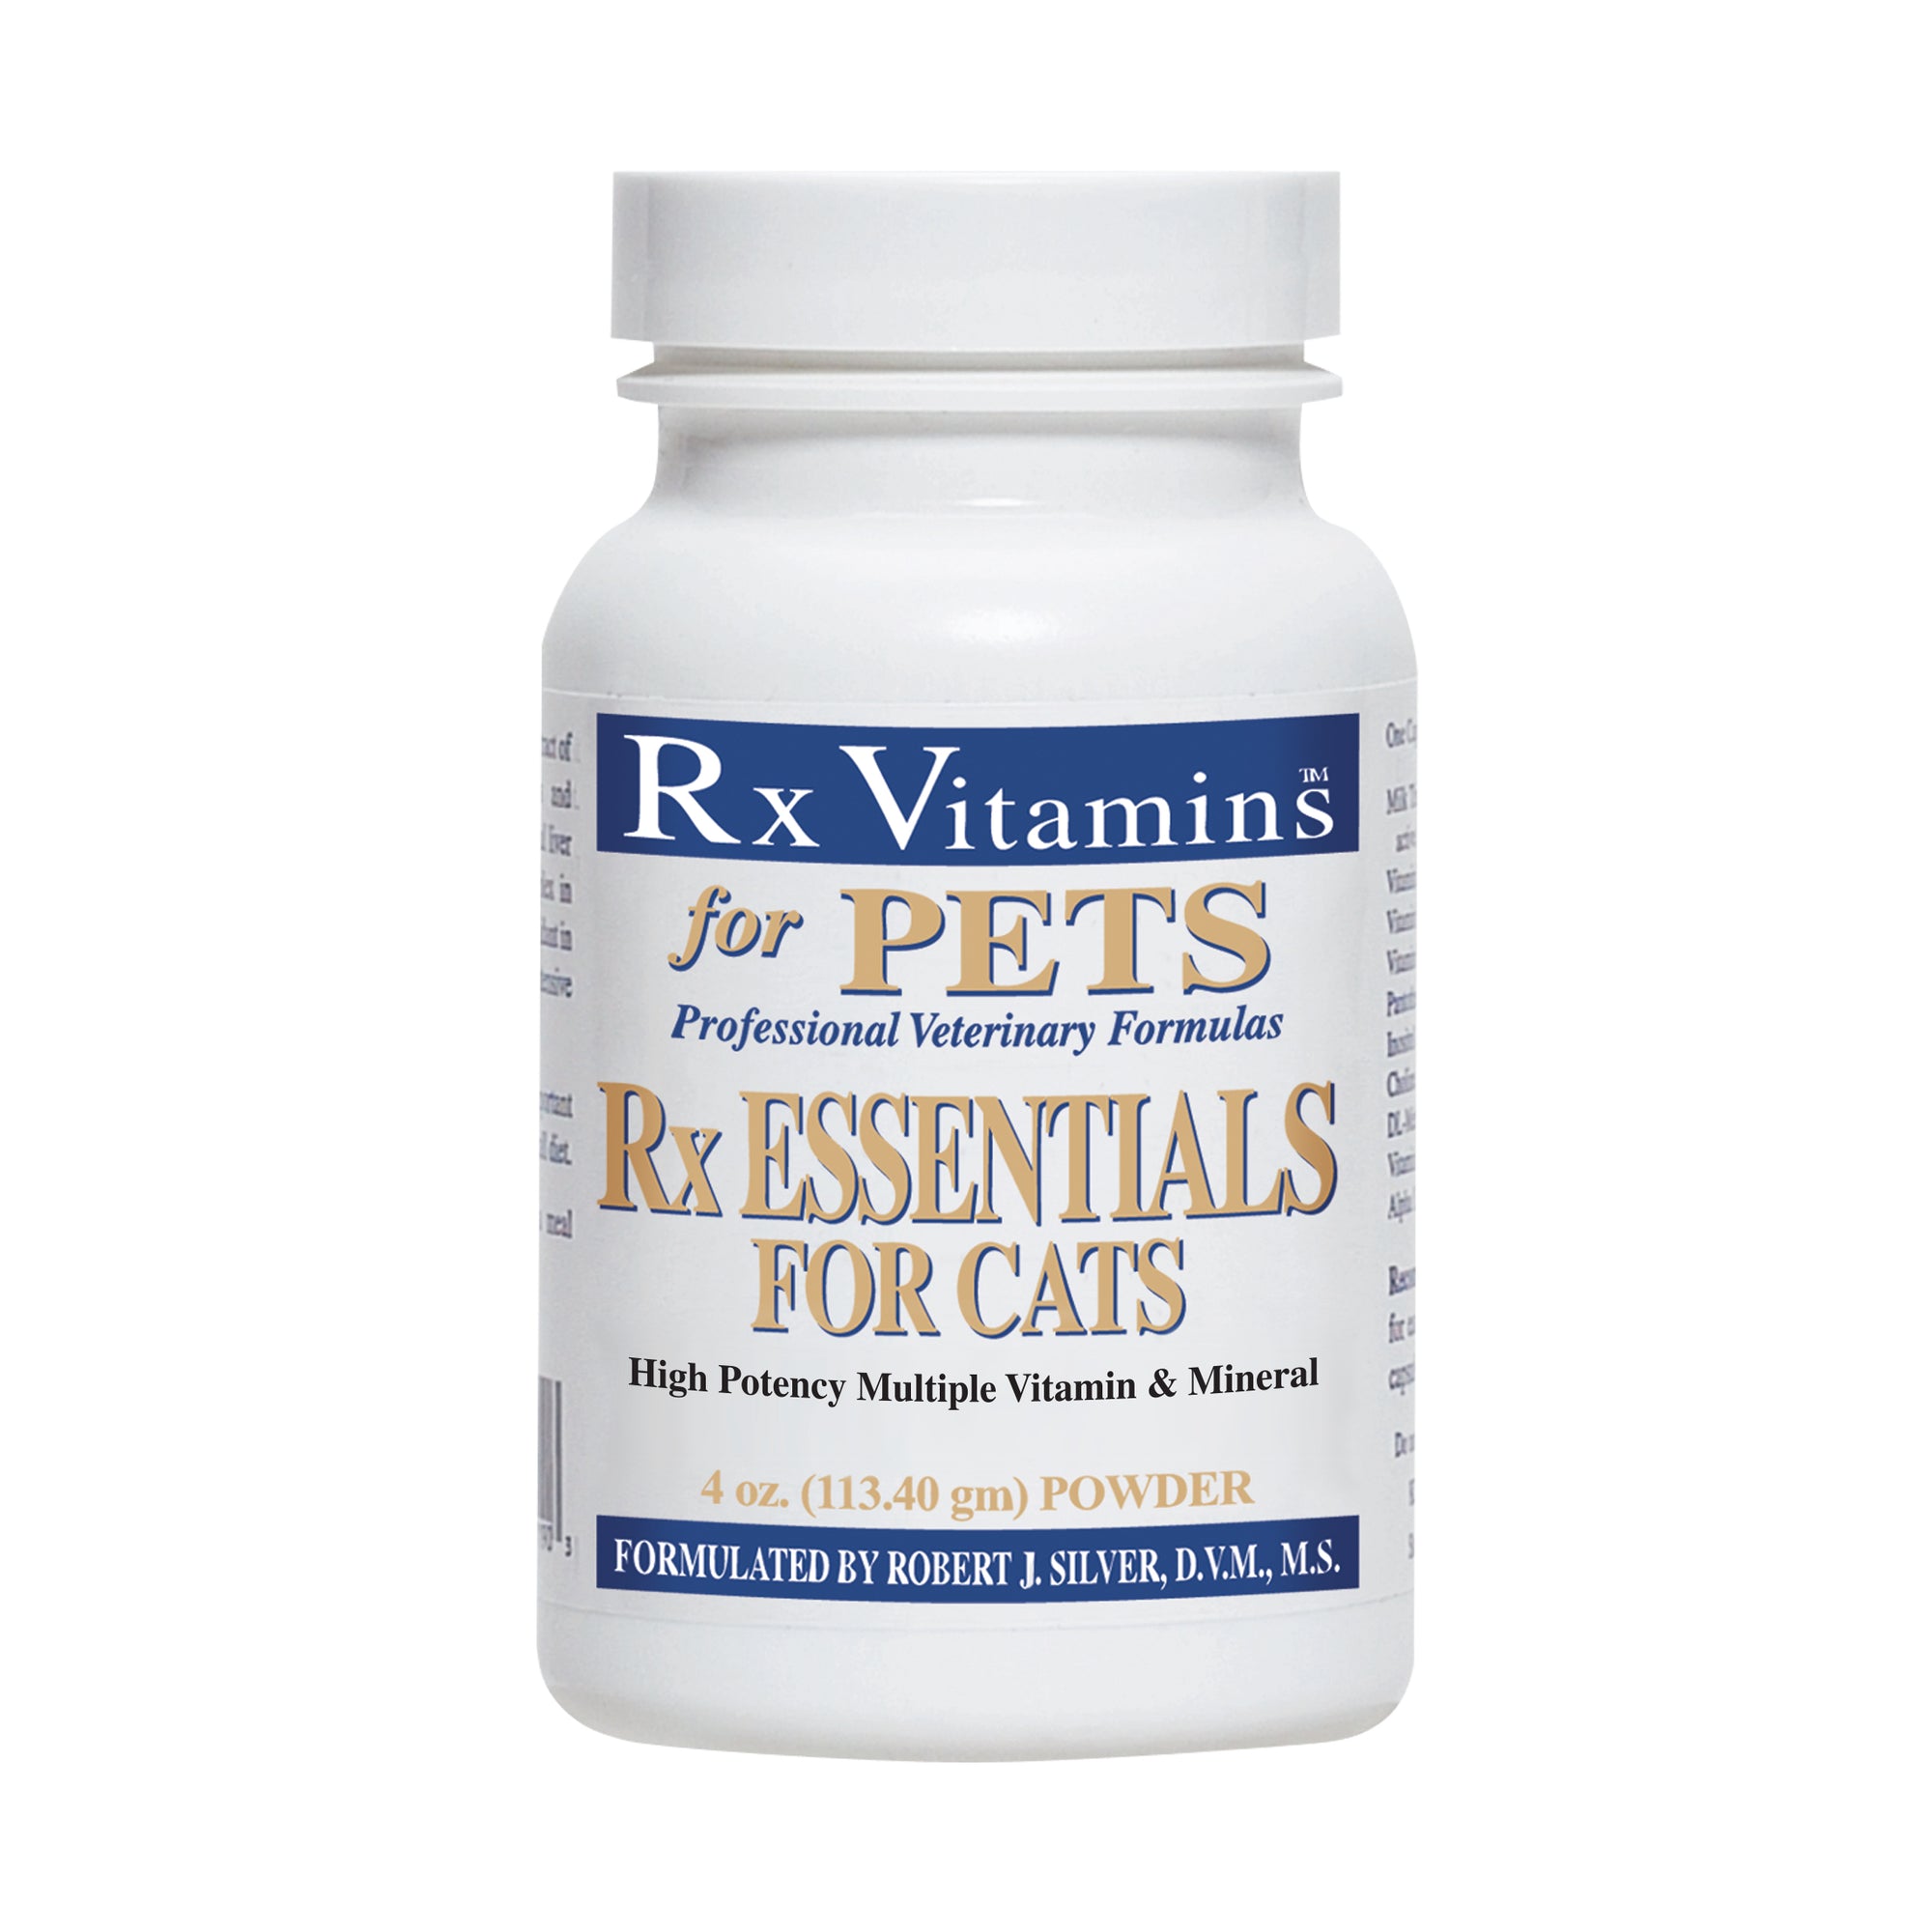 RX ESSENTIALS FOR CATS